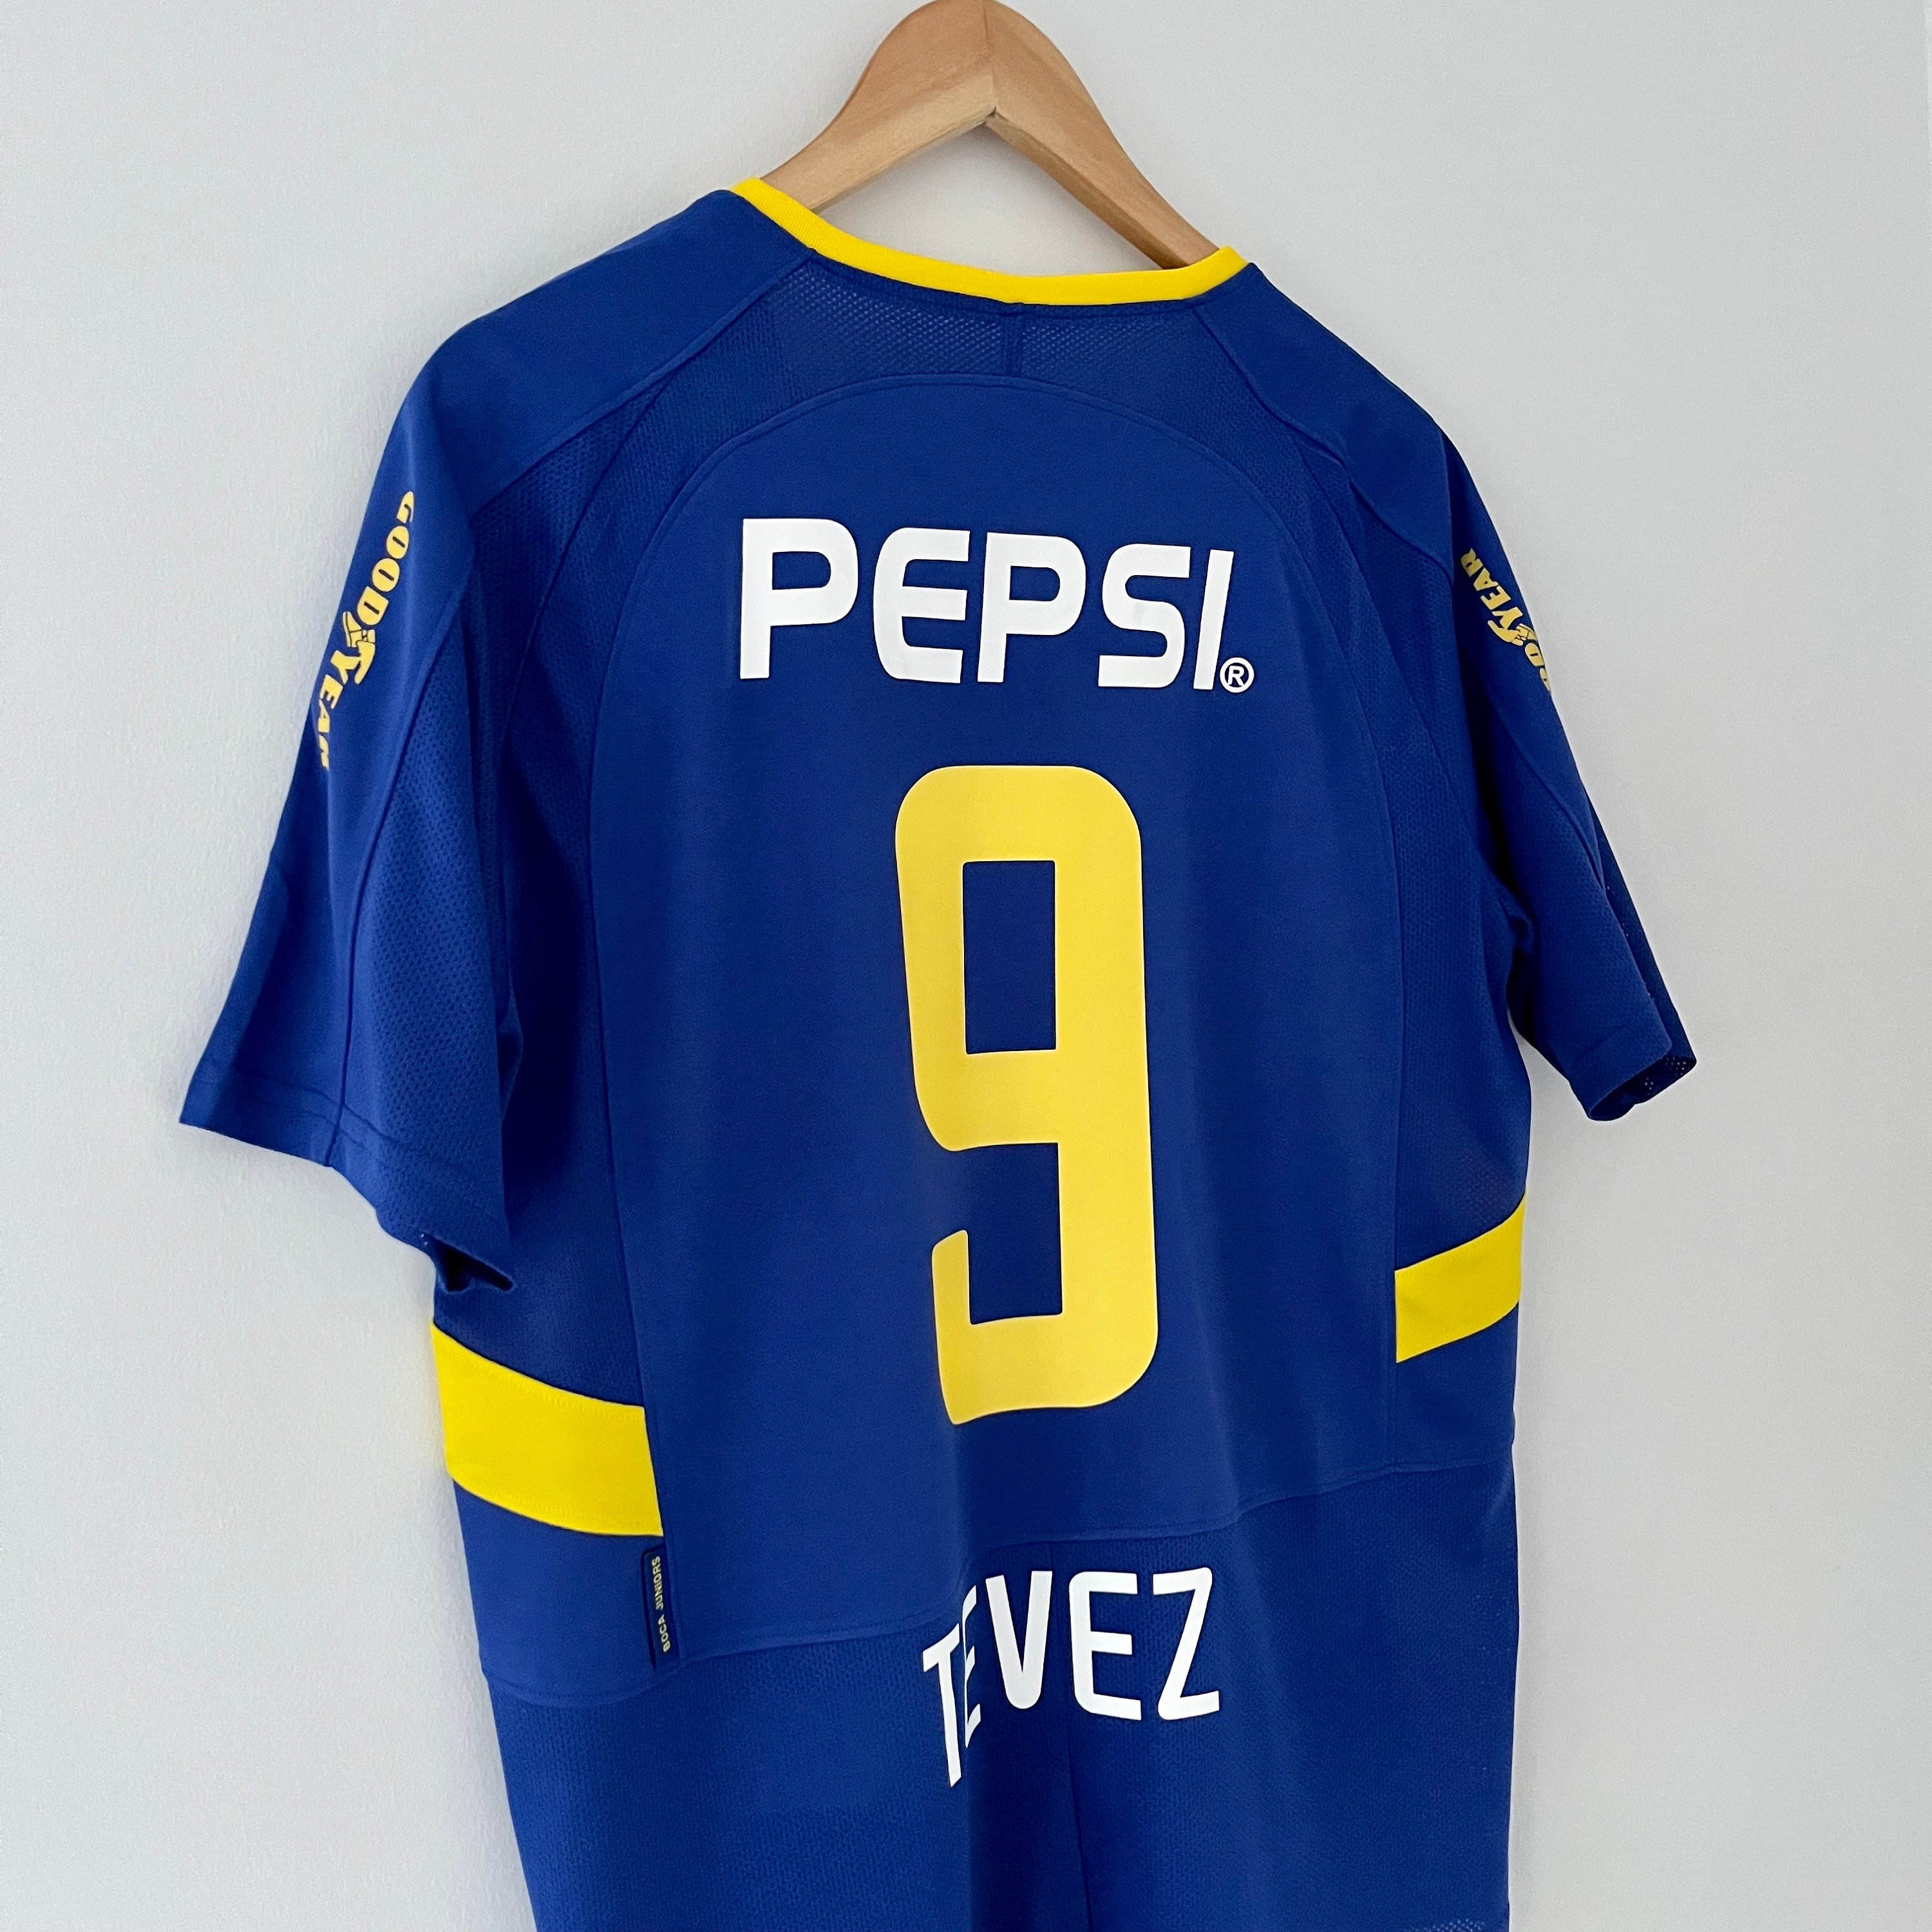 Boca Juniors Jerseys, Tees, Printing & More by Subside Sports